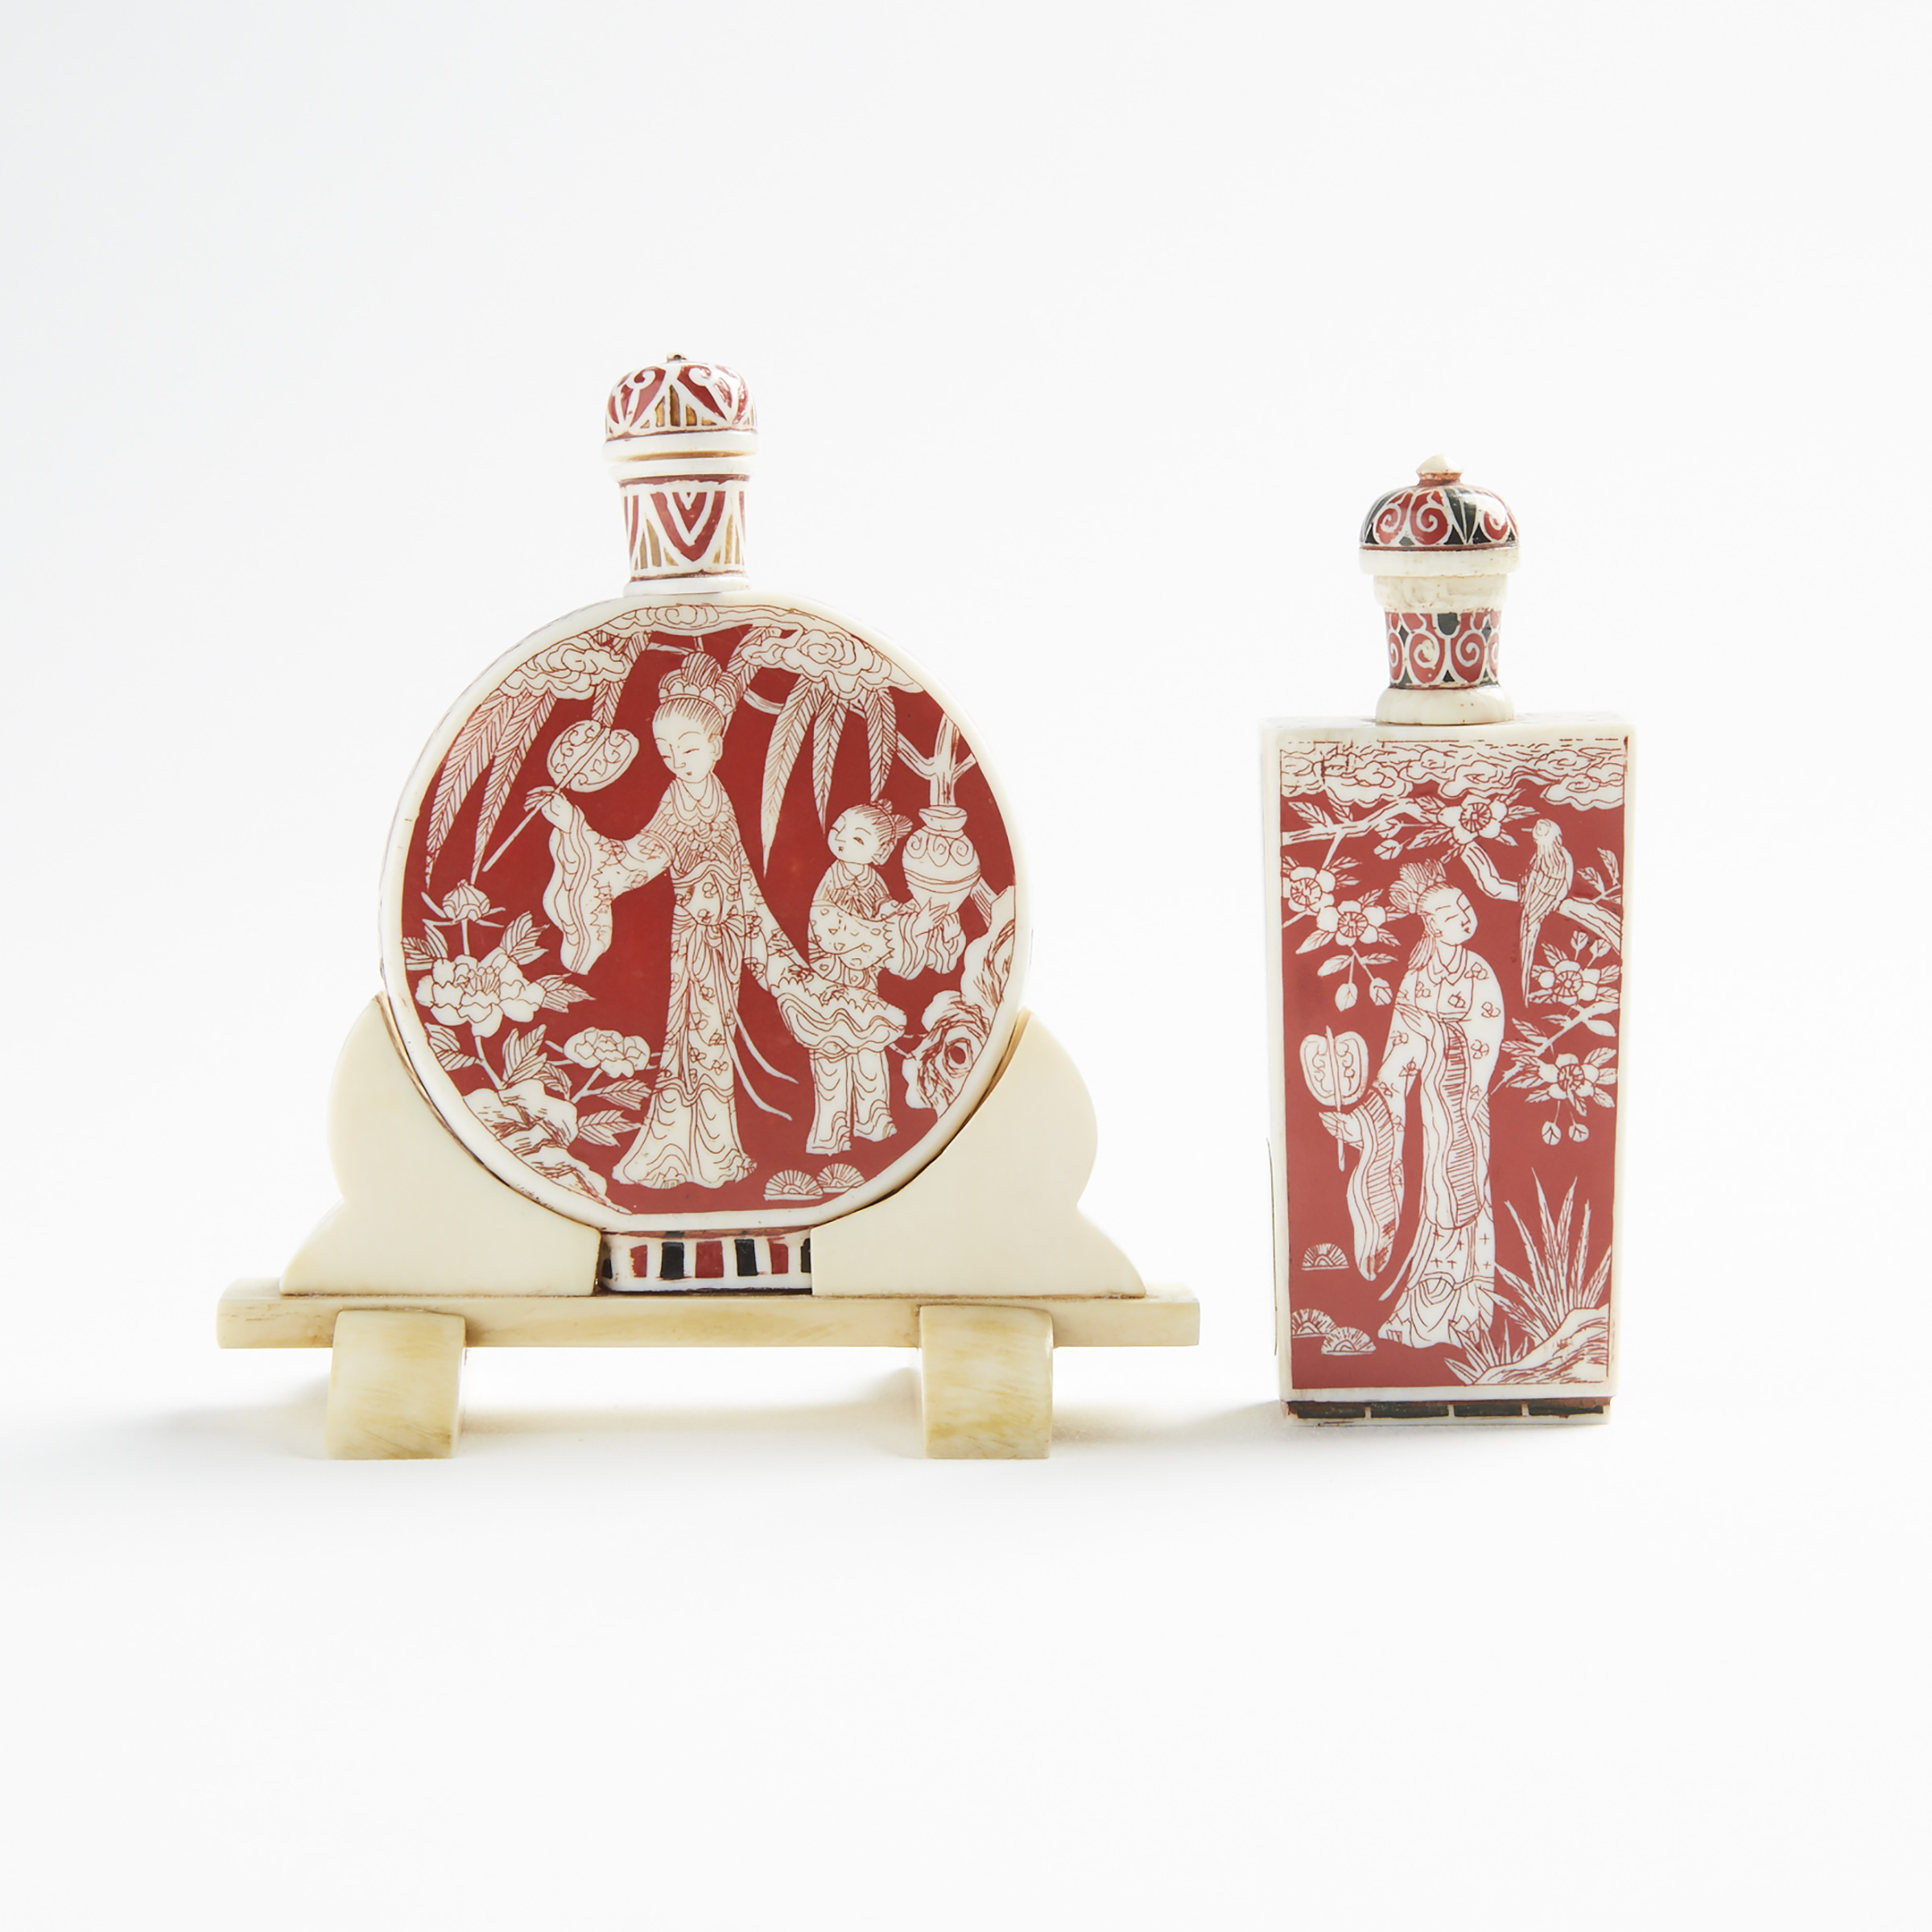 Two Polychrome Ivory Snuff Bottles, Late 19th/Early 20th Century